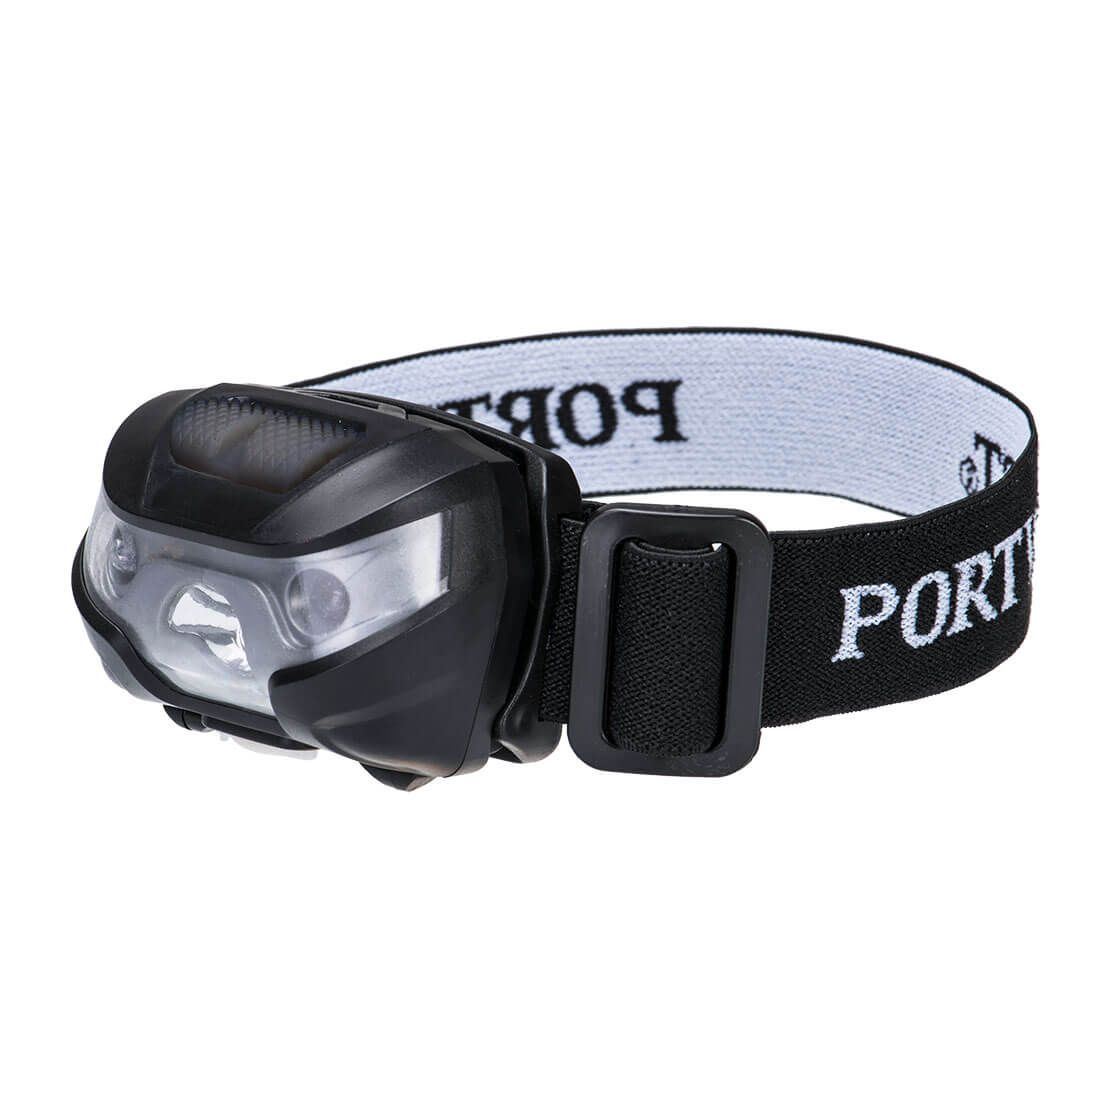 PA71 Torcia frontale ricaricabile USB Portwest